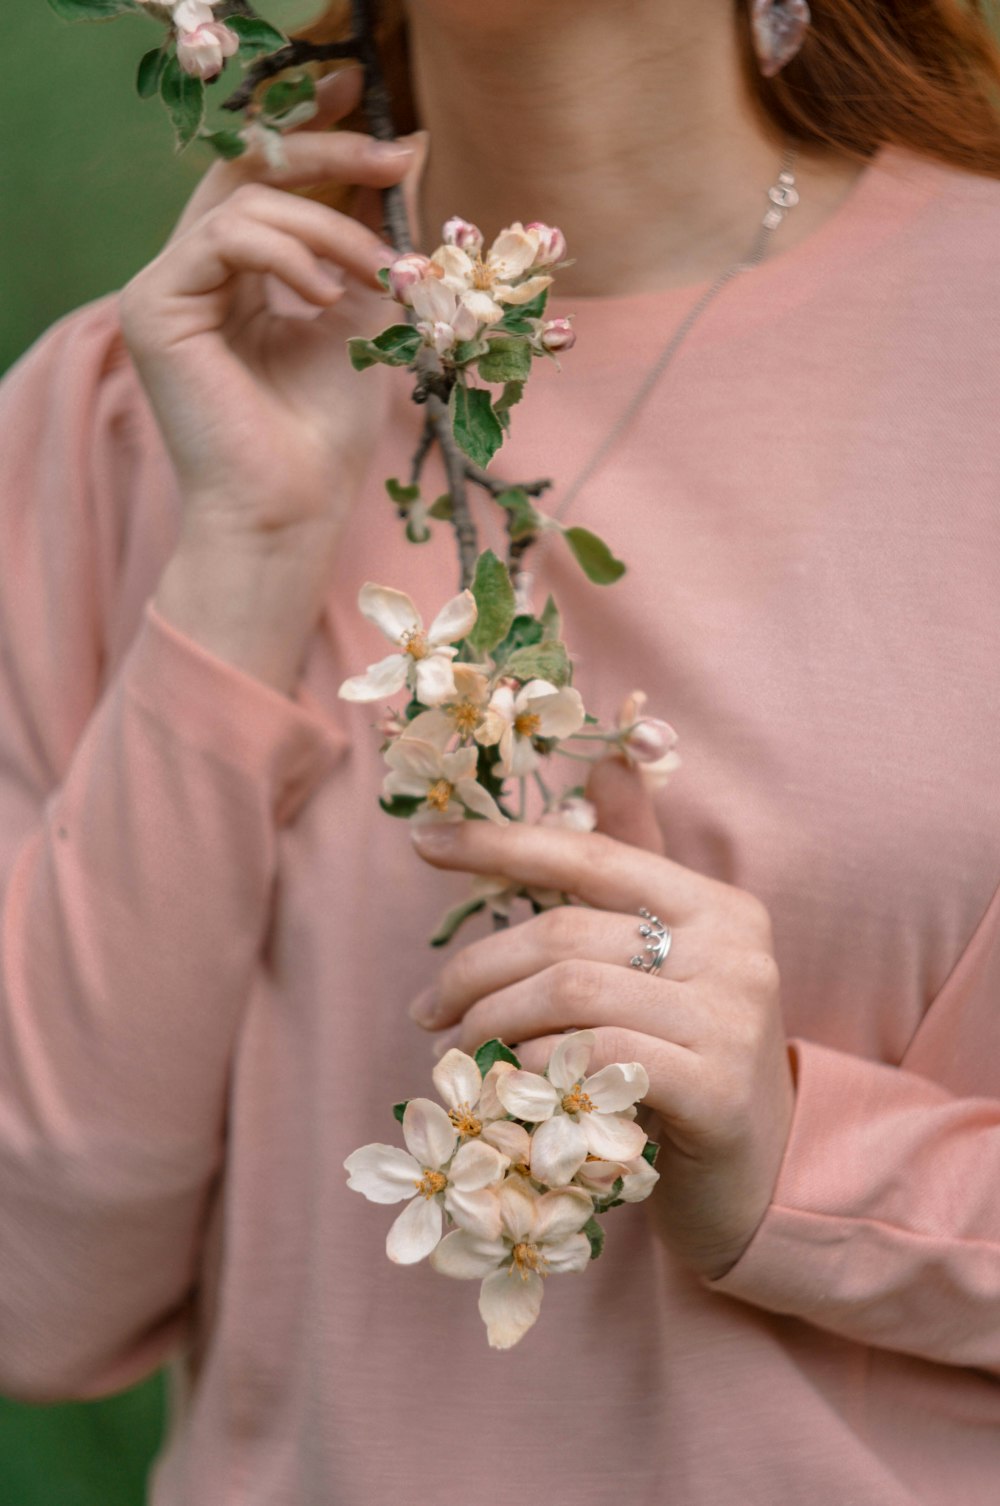 woman in pink long sleeve shirt holding white flowers